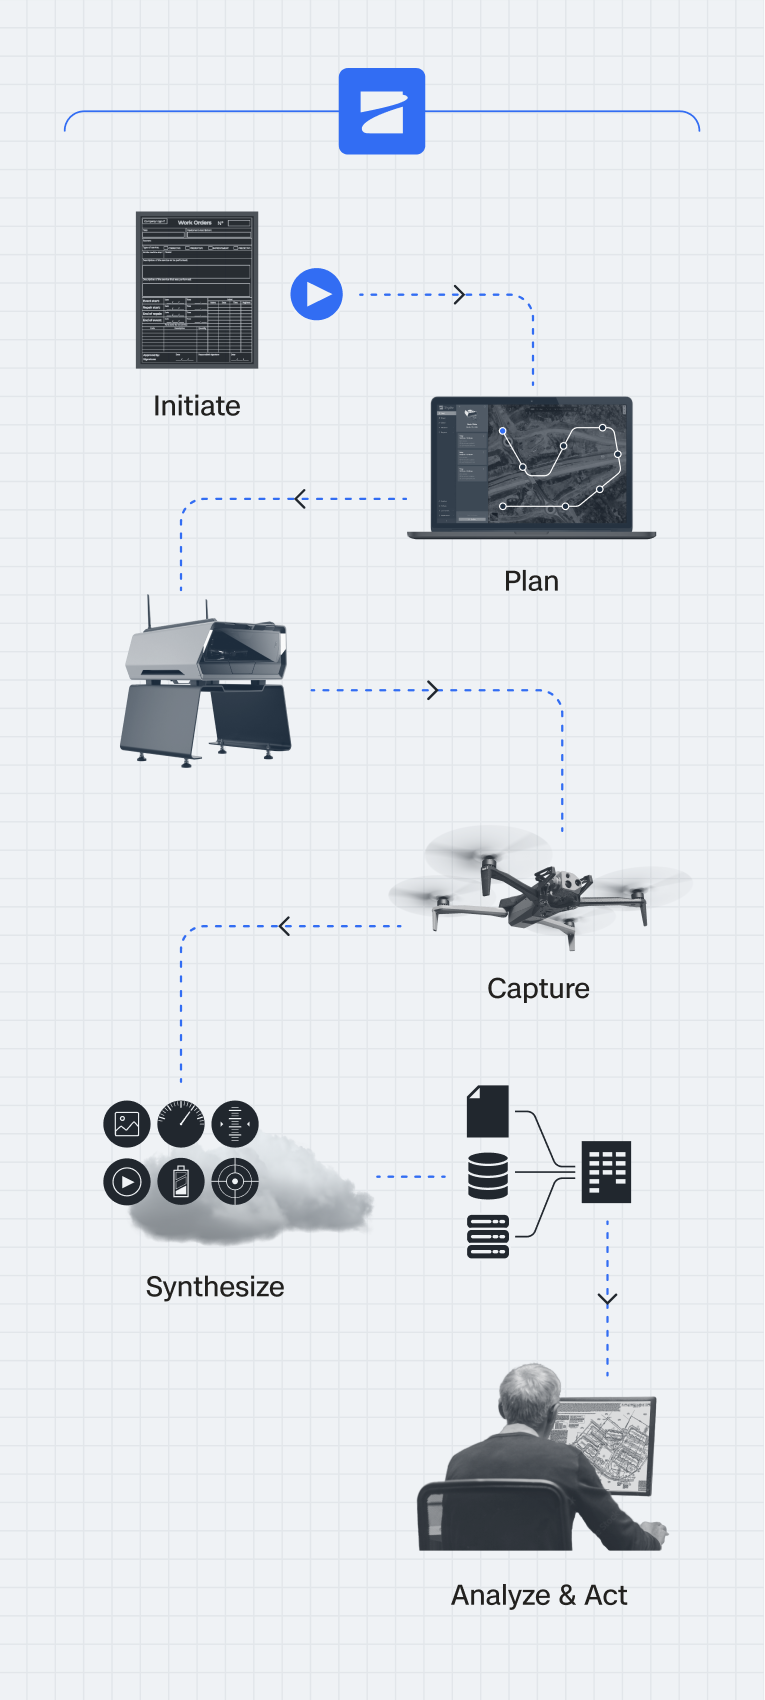 A typical aerial data capture workflow from work order to mission planning, to capturing, syncing, aggregating, and analyzing the data